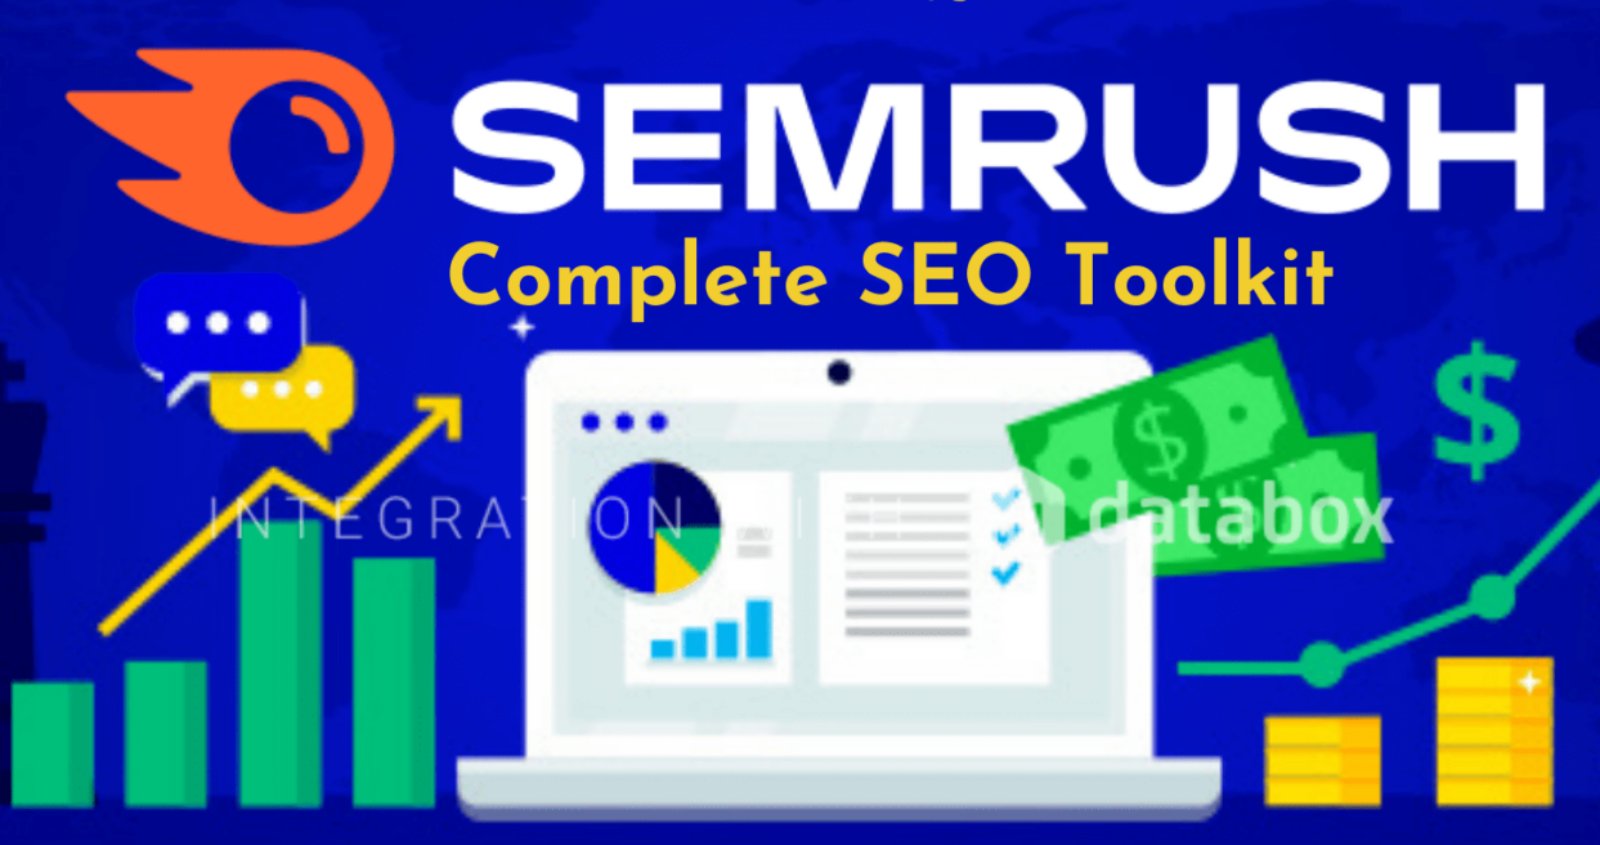 What is SEMrush Used For Is it Free